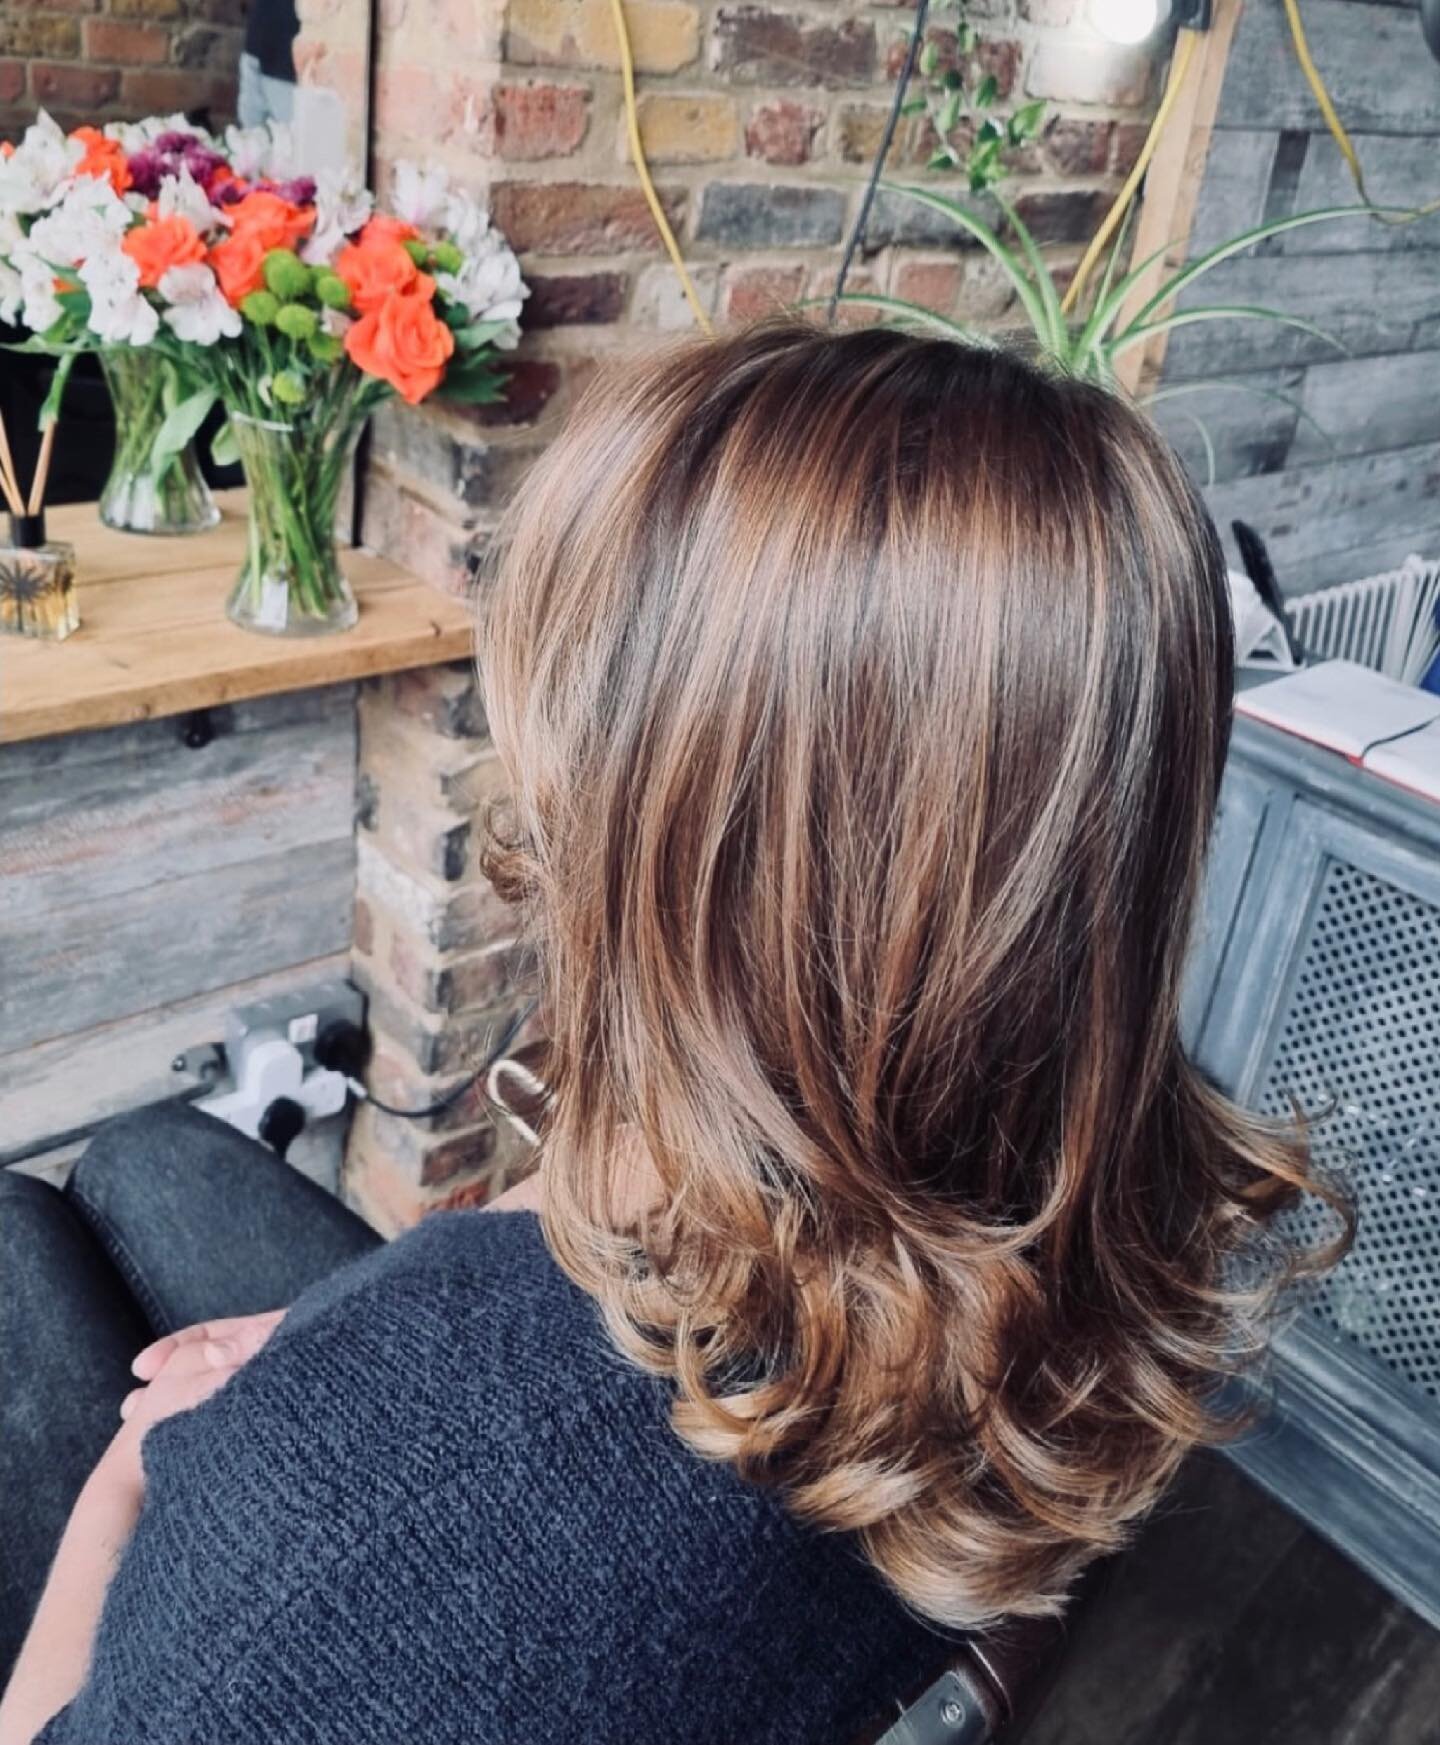 SUMMER READY 😌🤍

#hair #hairstyle #beauty #hairstyles #haircut #fashion #love #makeup #hairstylist #style #haircolor #instagood #beautiful #follow #model #like #cute #photooftheday #me #balayage #girl #barber #hairdresser #photography #hairgoals #i